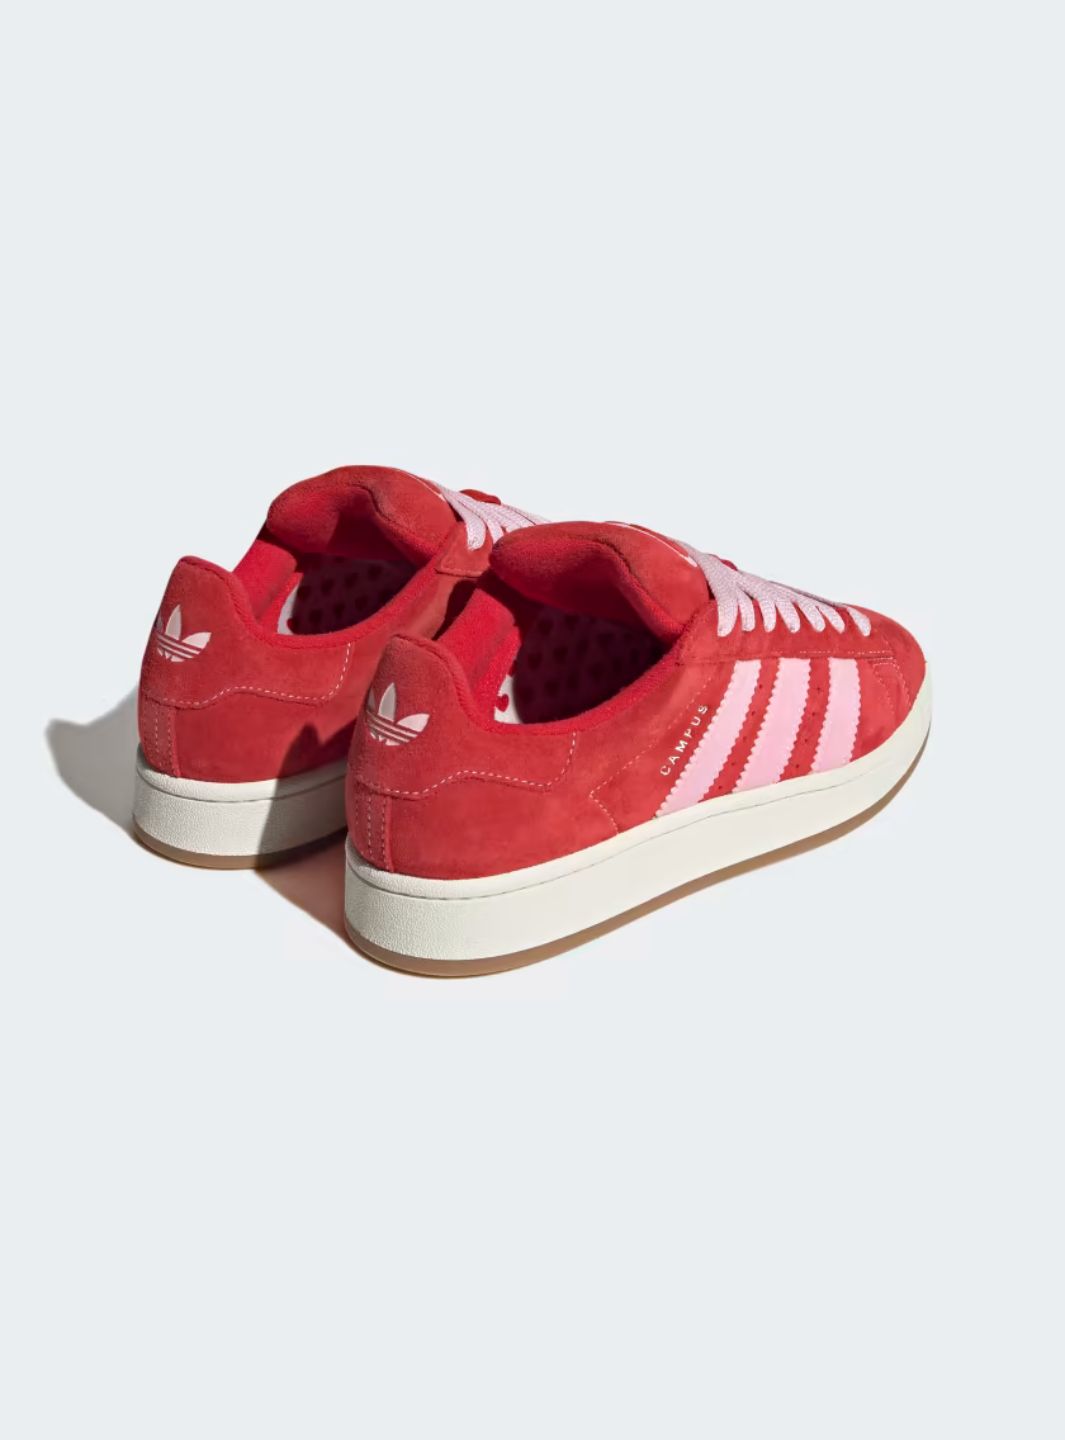 Adidas Campus 00s Better Scarlet Clear Pink - H03477 | ResellZone